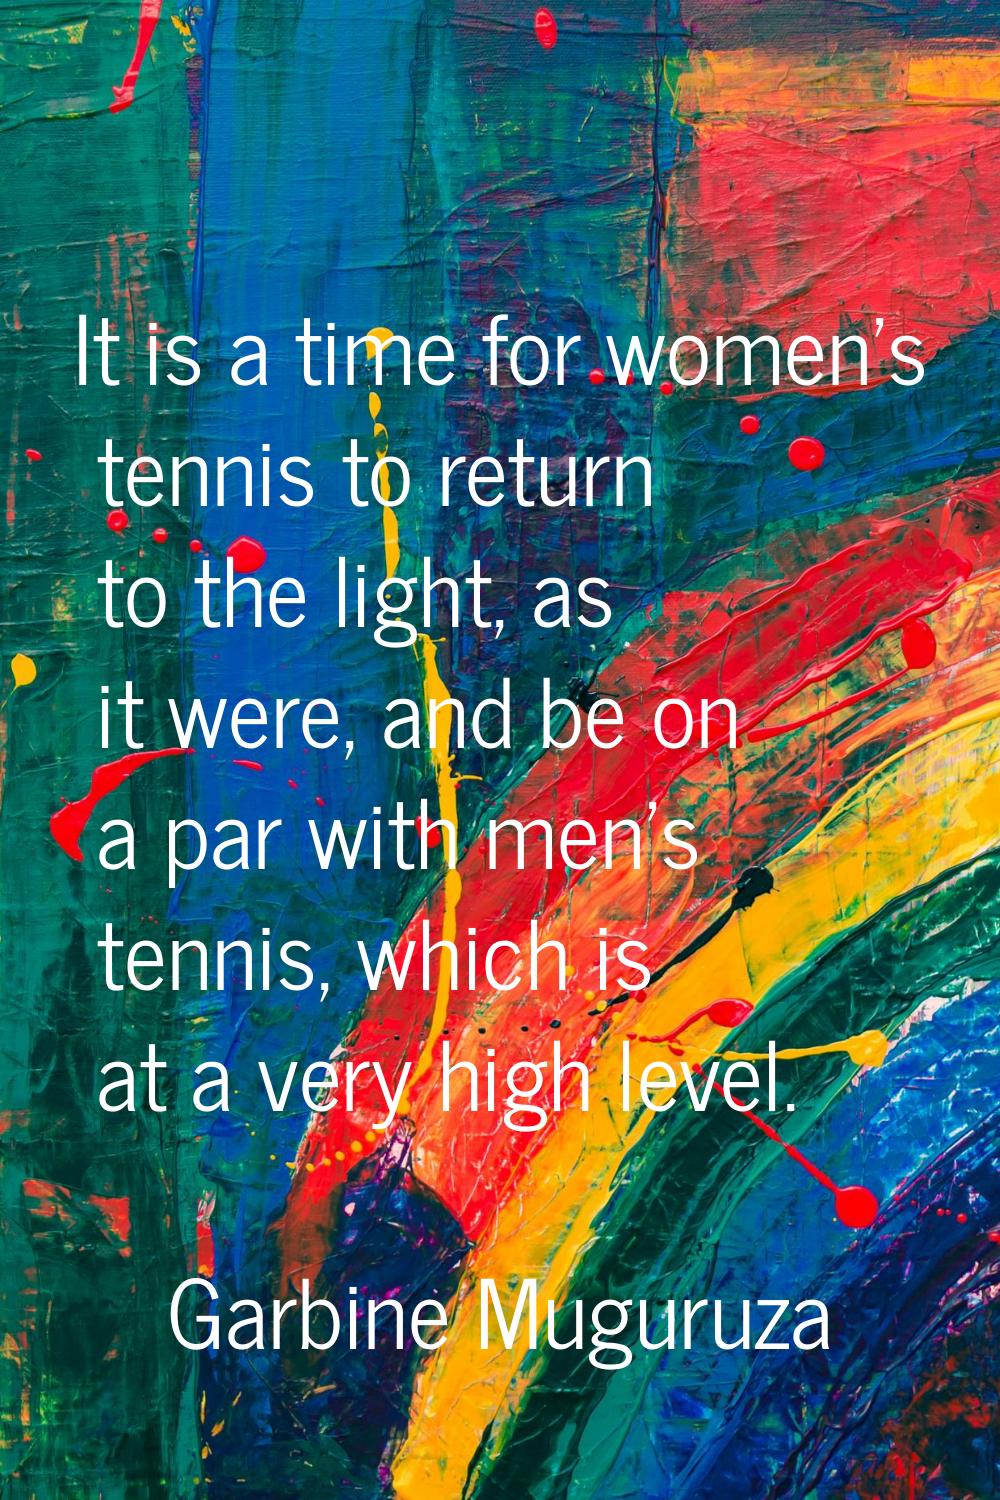 It is a time for women's tennis to return to the light, as it were, and be on a par with men's tenn